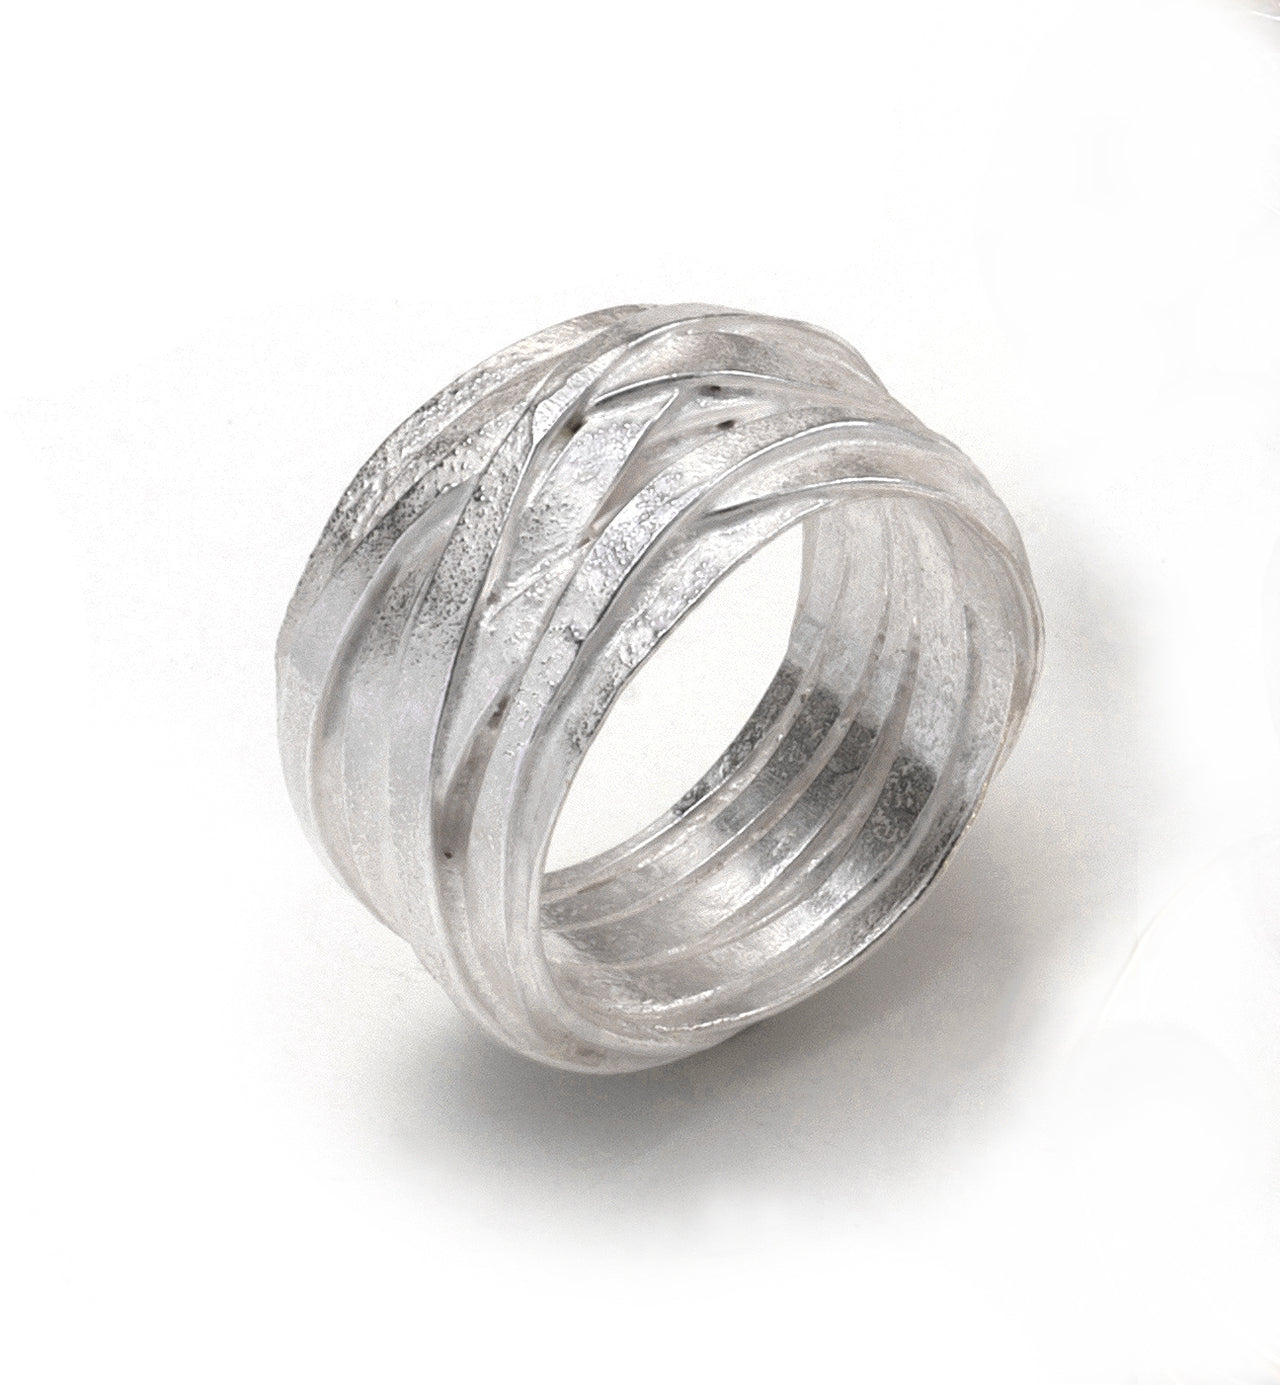 Silver Wrap Ring- Wide